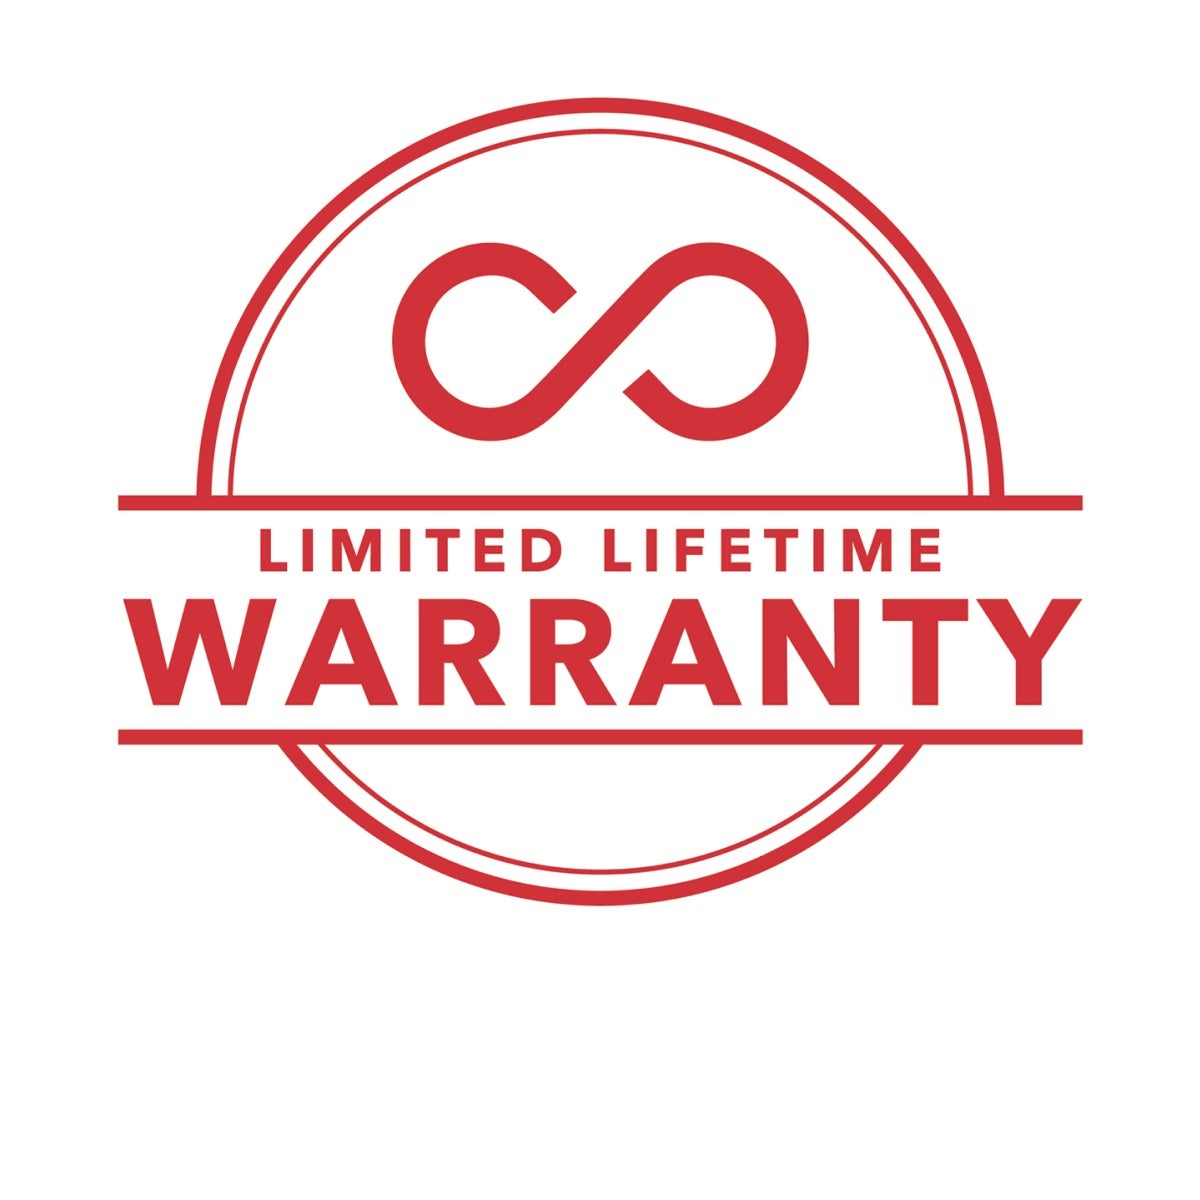 Limited Lifetime Warranty||If your InvisibleShield ever gets worn or damaged, we will replace it for as long as you own your device. 